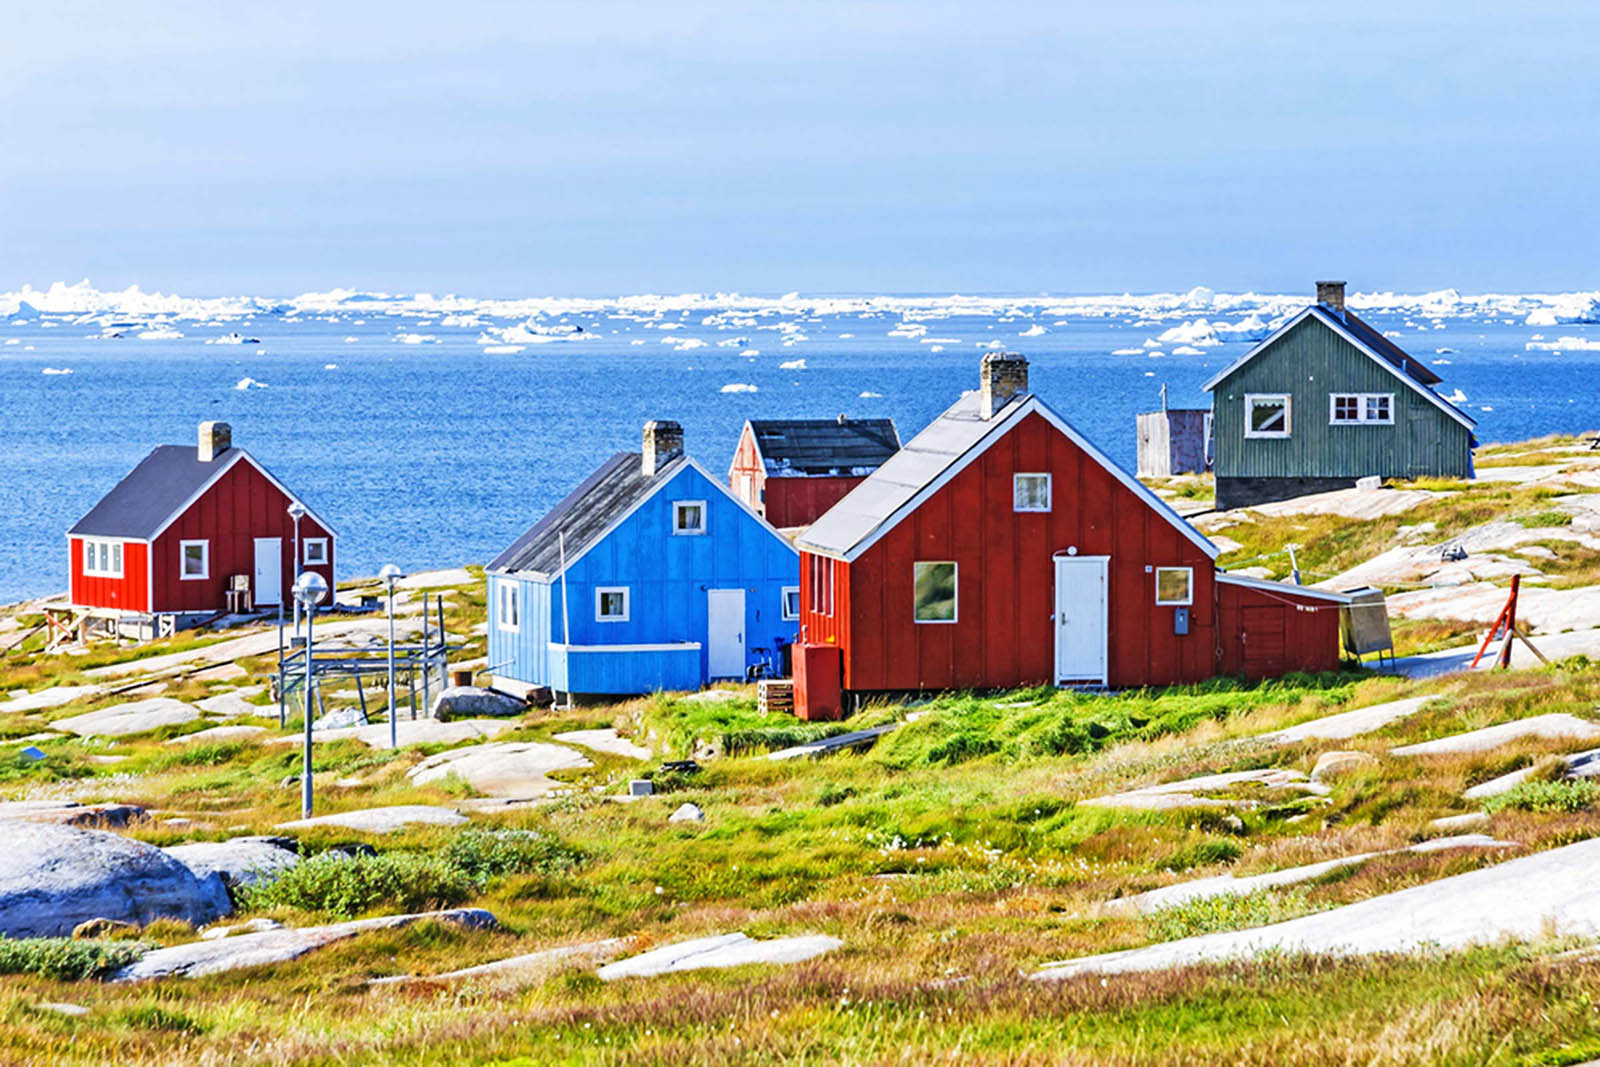 Are You a Master of General Knowledge? Take This True or False Quiz to Find Out Greenland